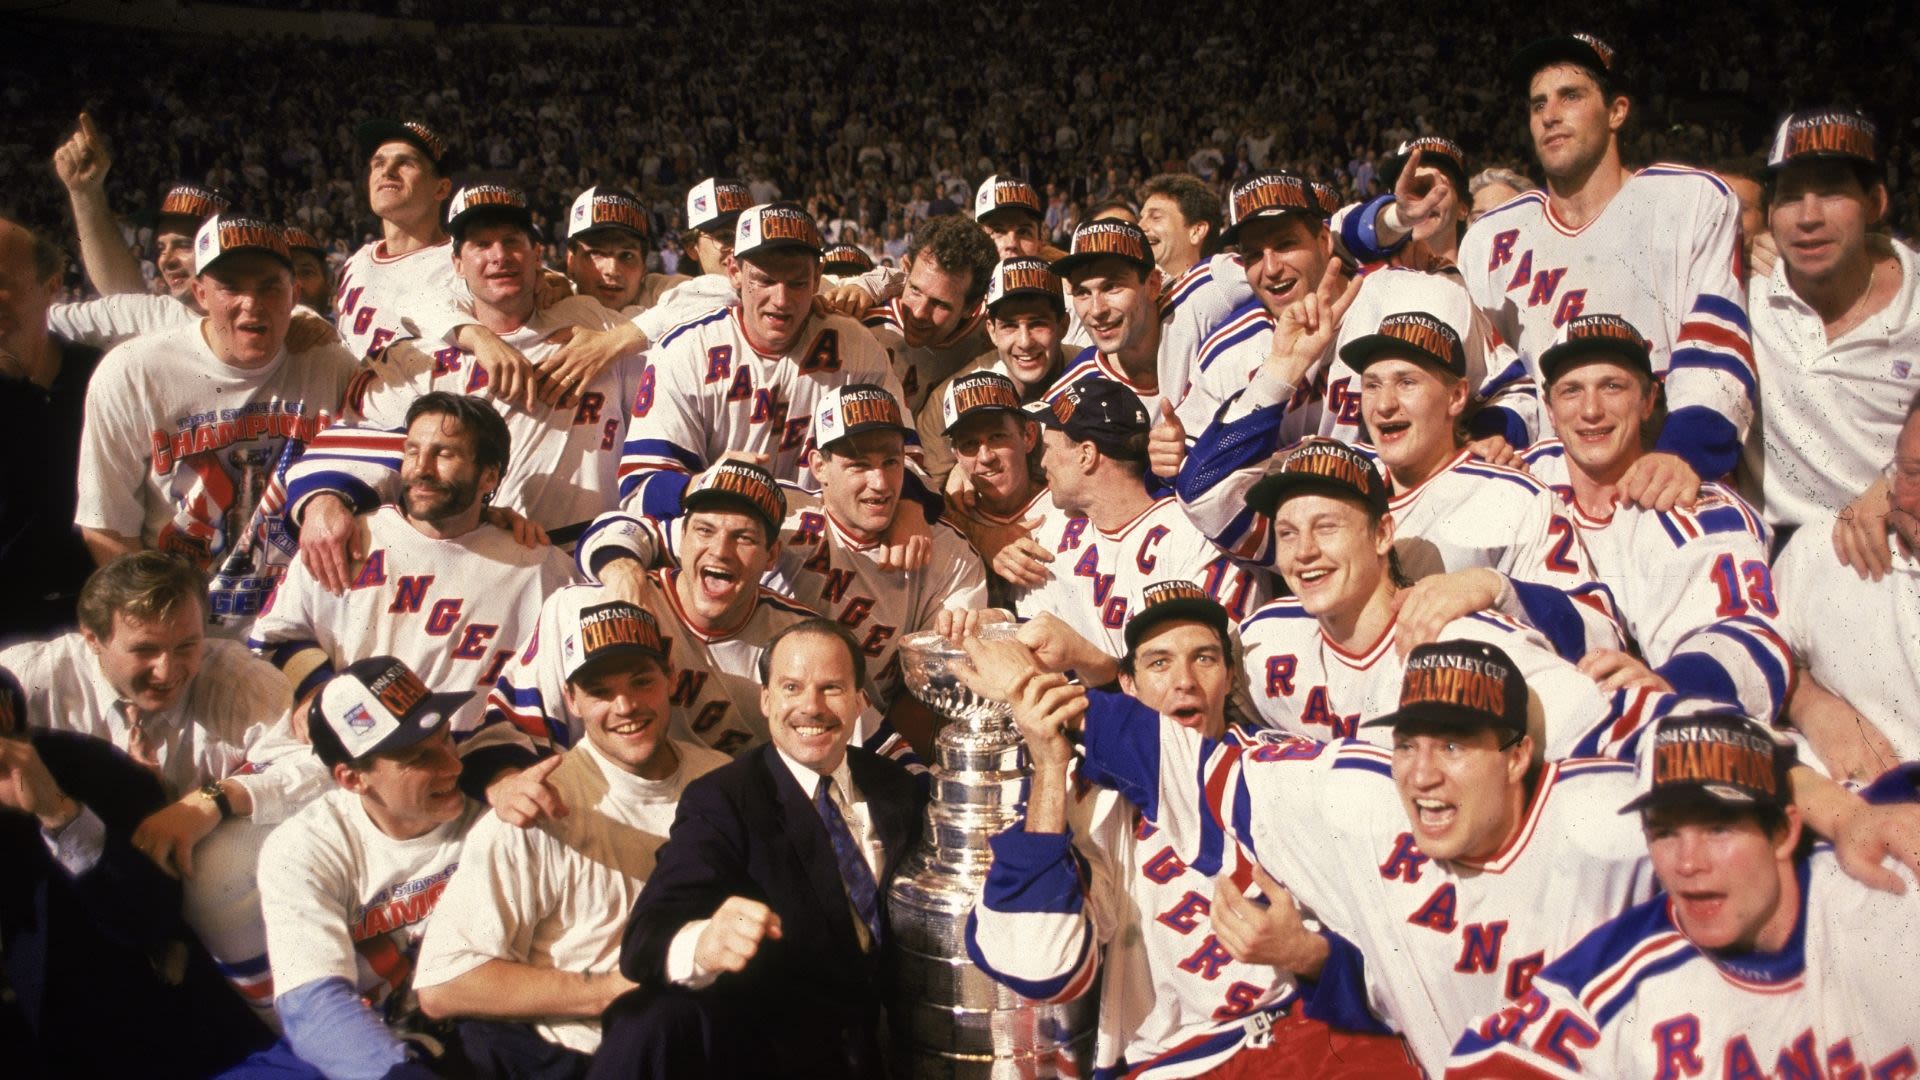 How to watch ESPN E60 on NY Rangers' 1994 Stanley Cup win